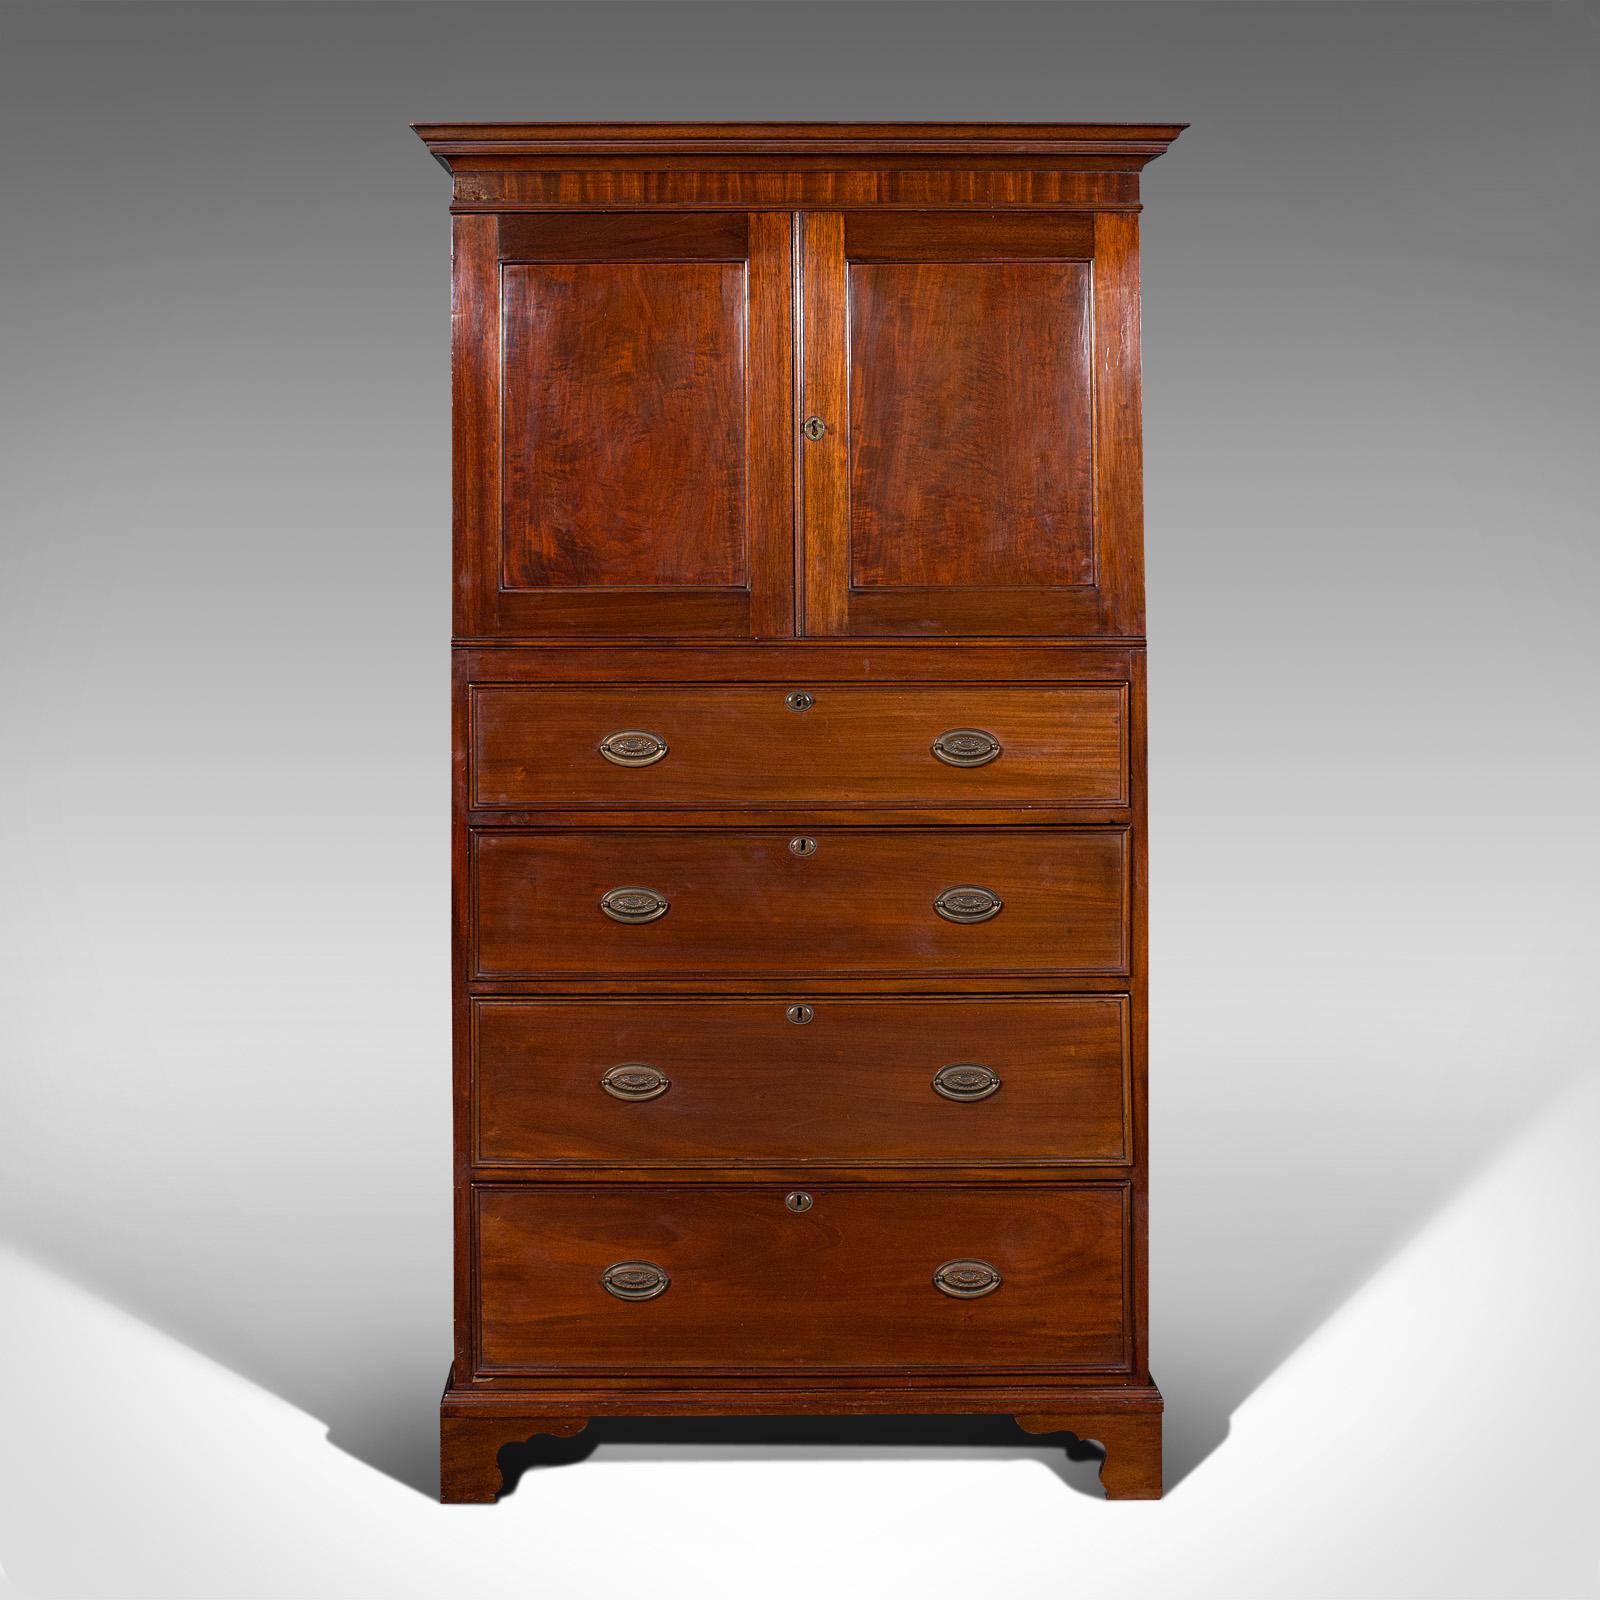 This is an antique linen press. An English, mahogany bedroom tallboy cabinet with chest of drawers below, dating to the late Victorian period, circa 1900.

Beautifully presented cabinet of usefully narrow proportion
Displays a desirable aged